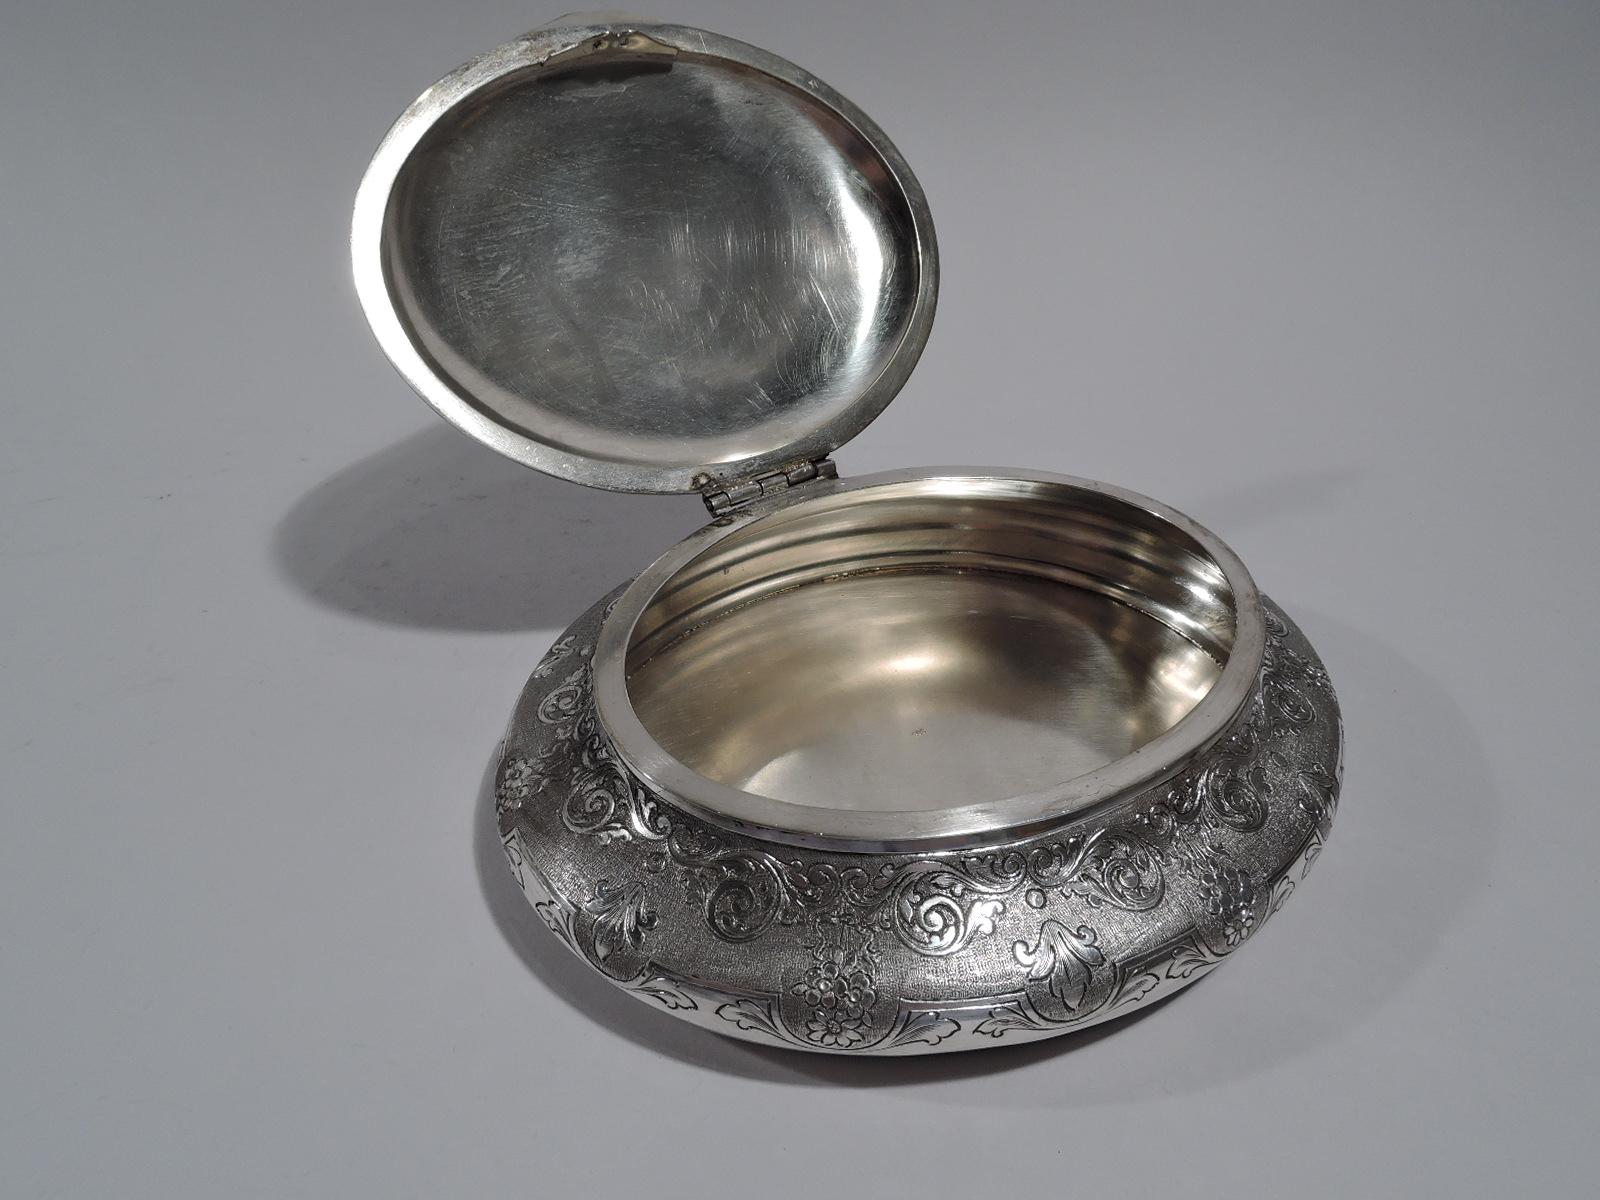 Turn of the century European 800 silver keepsake box. Oval and bellied. Cover hinged and domed with cast elephant finial. Engraved scrolls, flowers, and leaves on stippled ground. Marked “800”. Weight: 13 troy ounces.